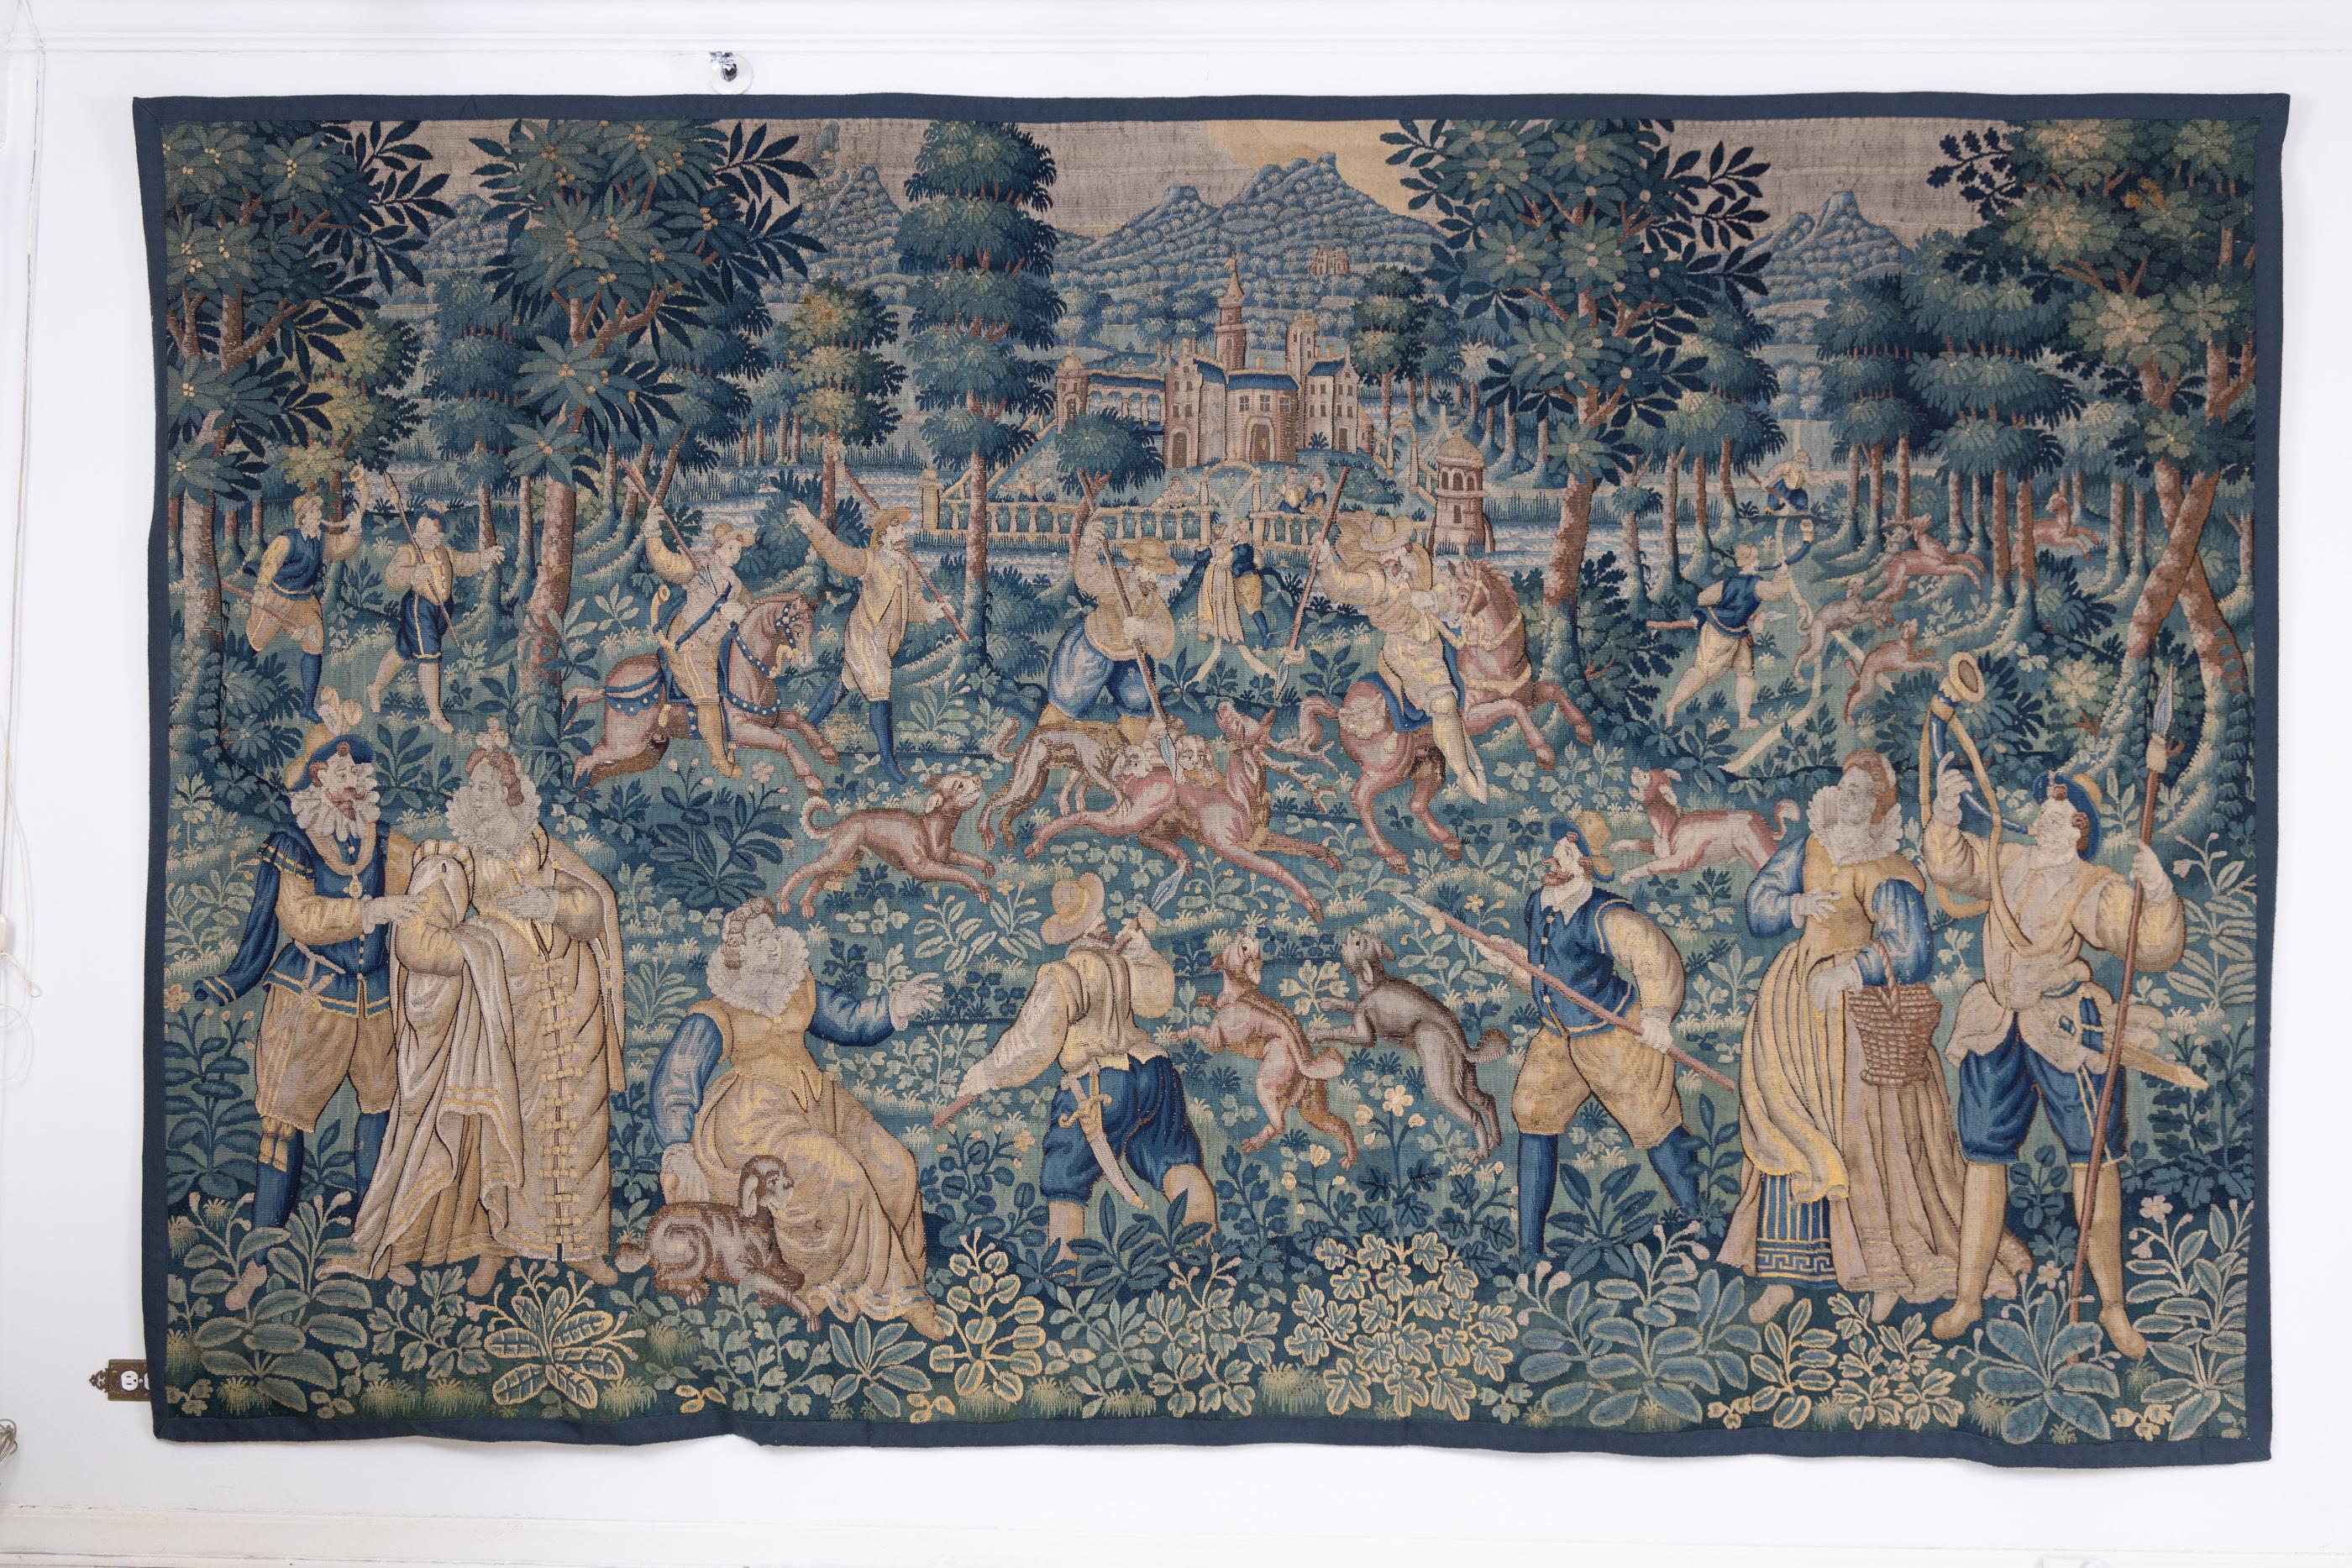 17th century French Elaborately loomed large tapestry with mountains and castle in background, depicting flushers blowing their horns to flush deer from the forest; hunters on horseback and on foot with staffs, going after deer with long spears, and